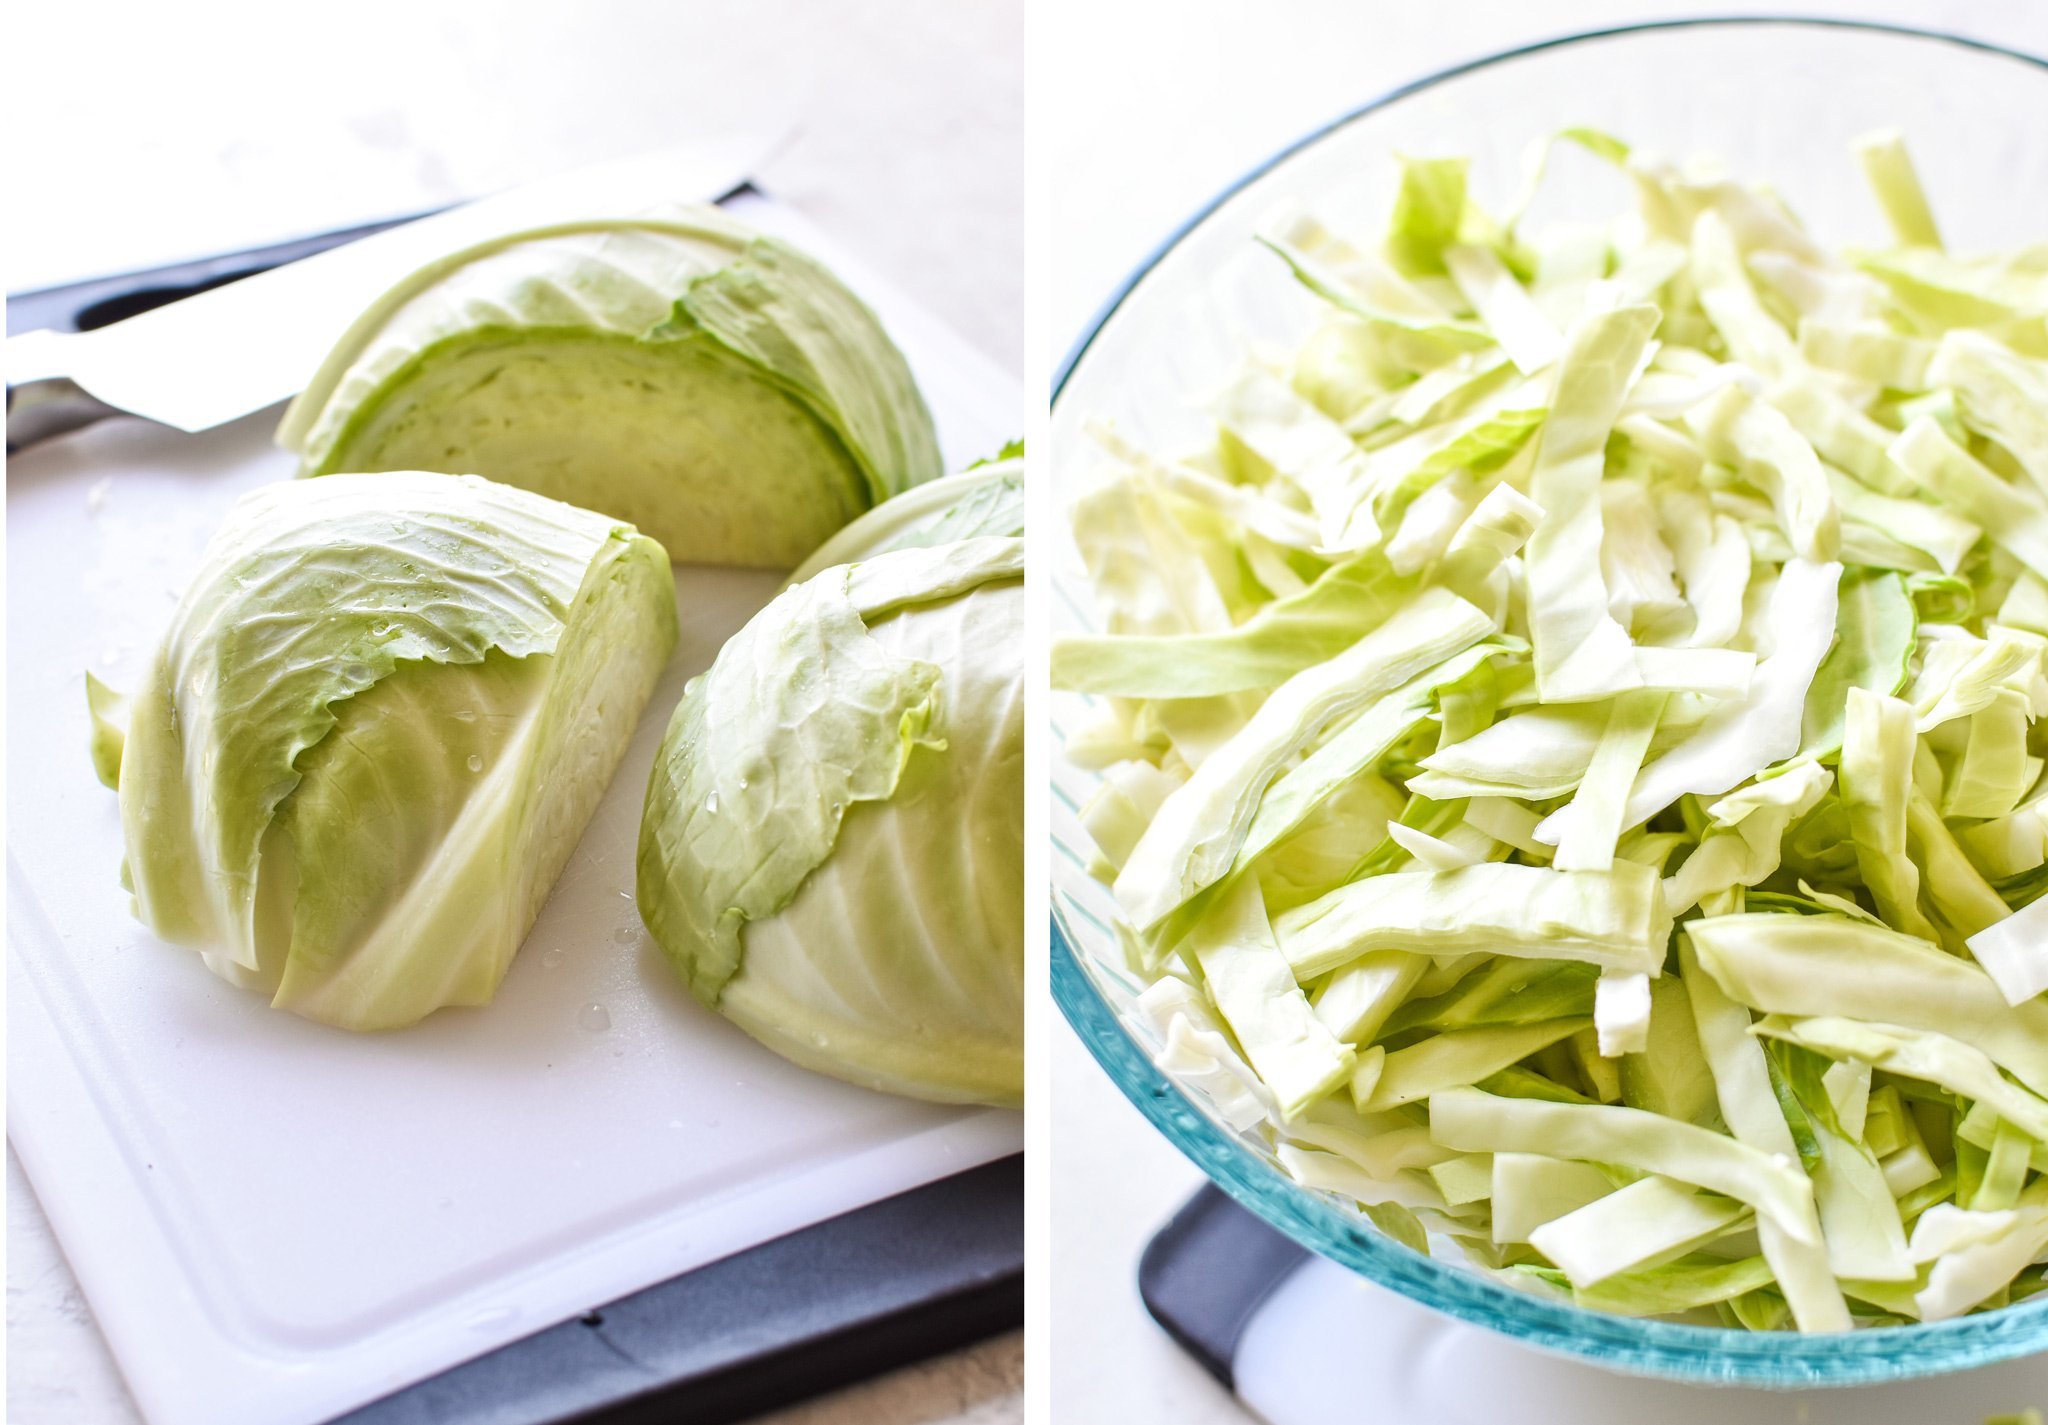 Left: A head of cabbage cut up and ready to be shredded for stir fry. Right: a bowl of shredded cabbage ready for stir fry.